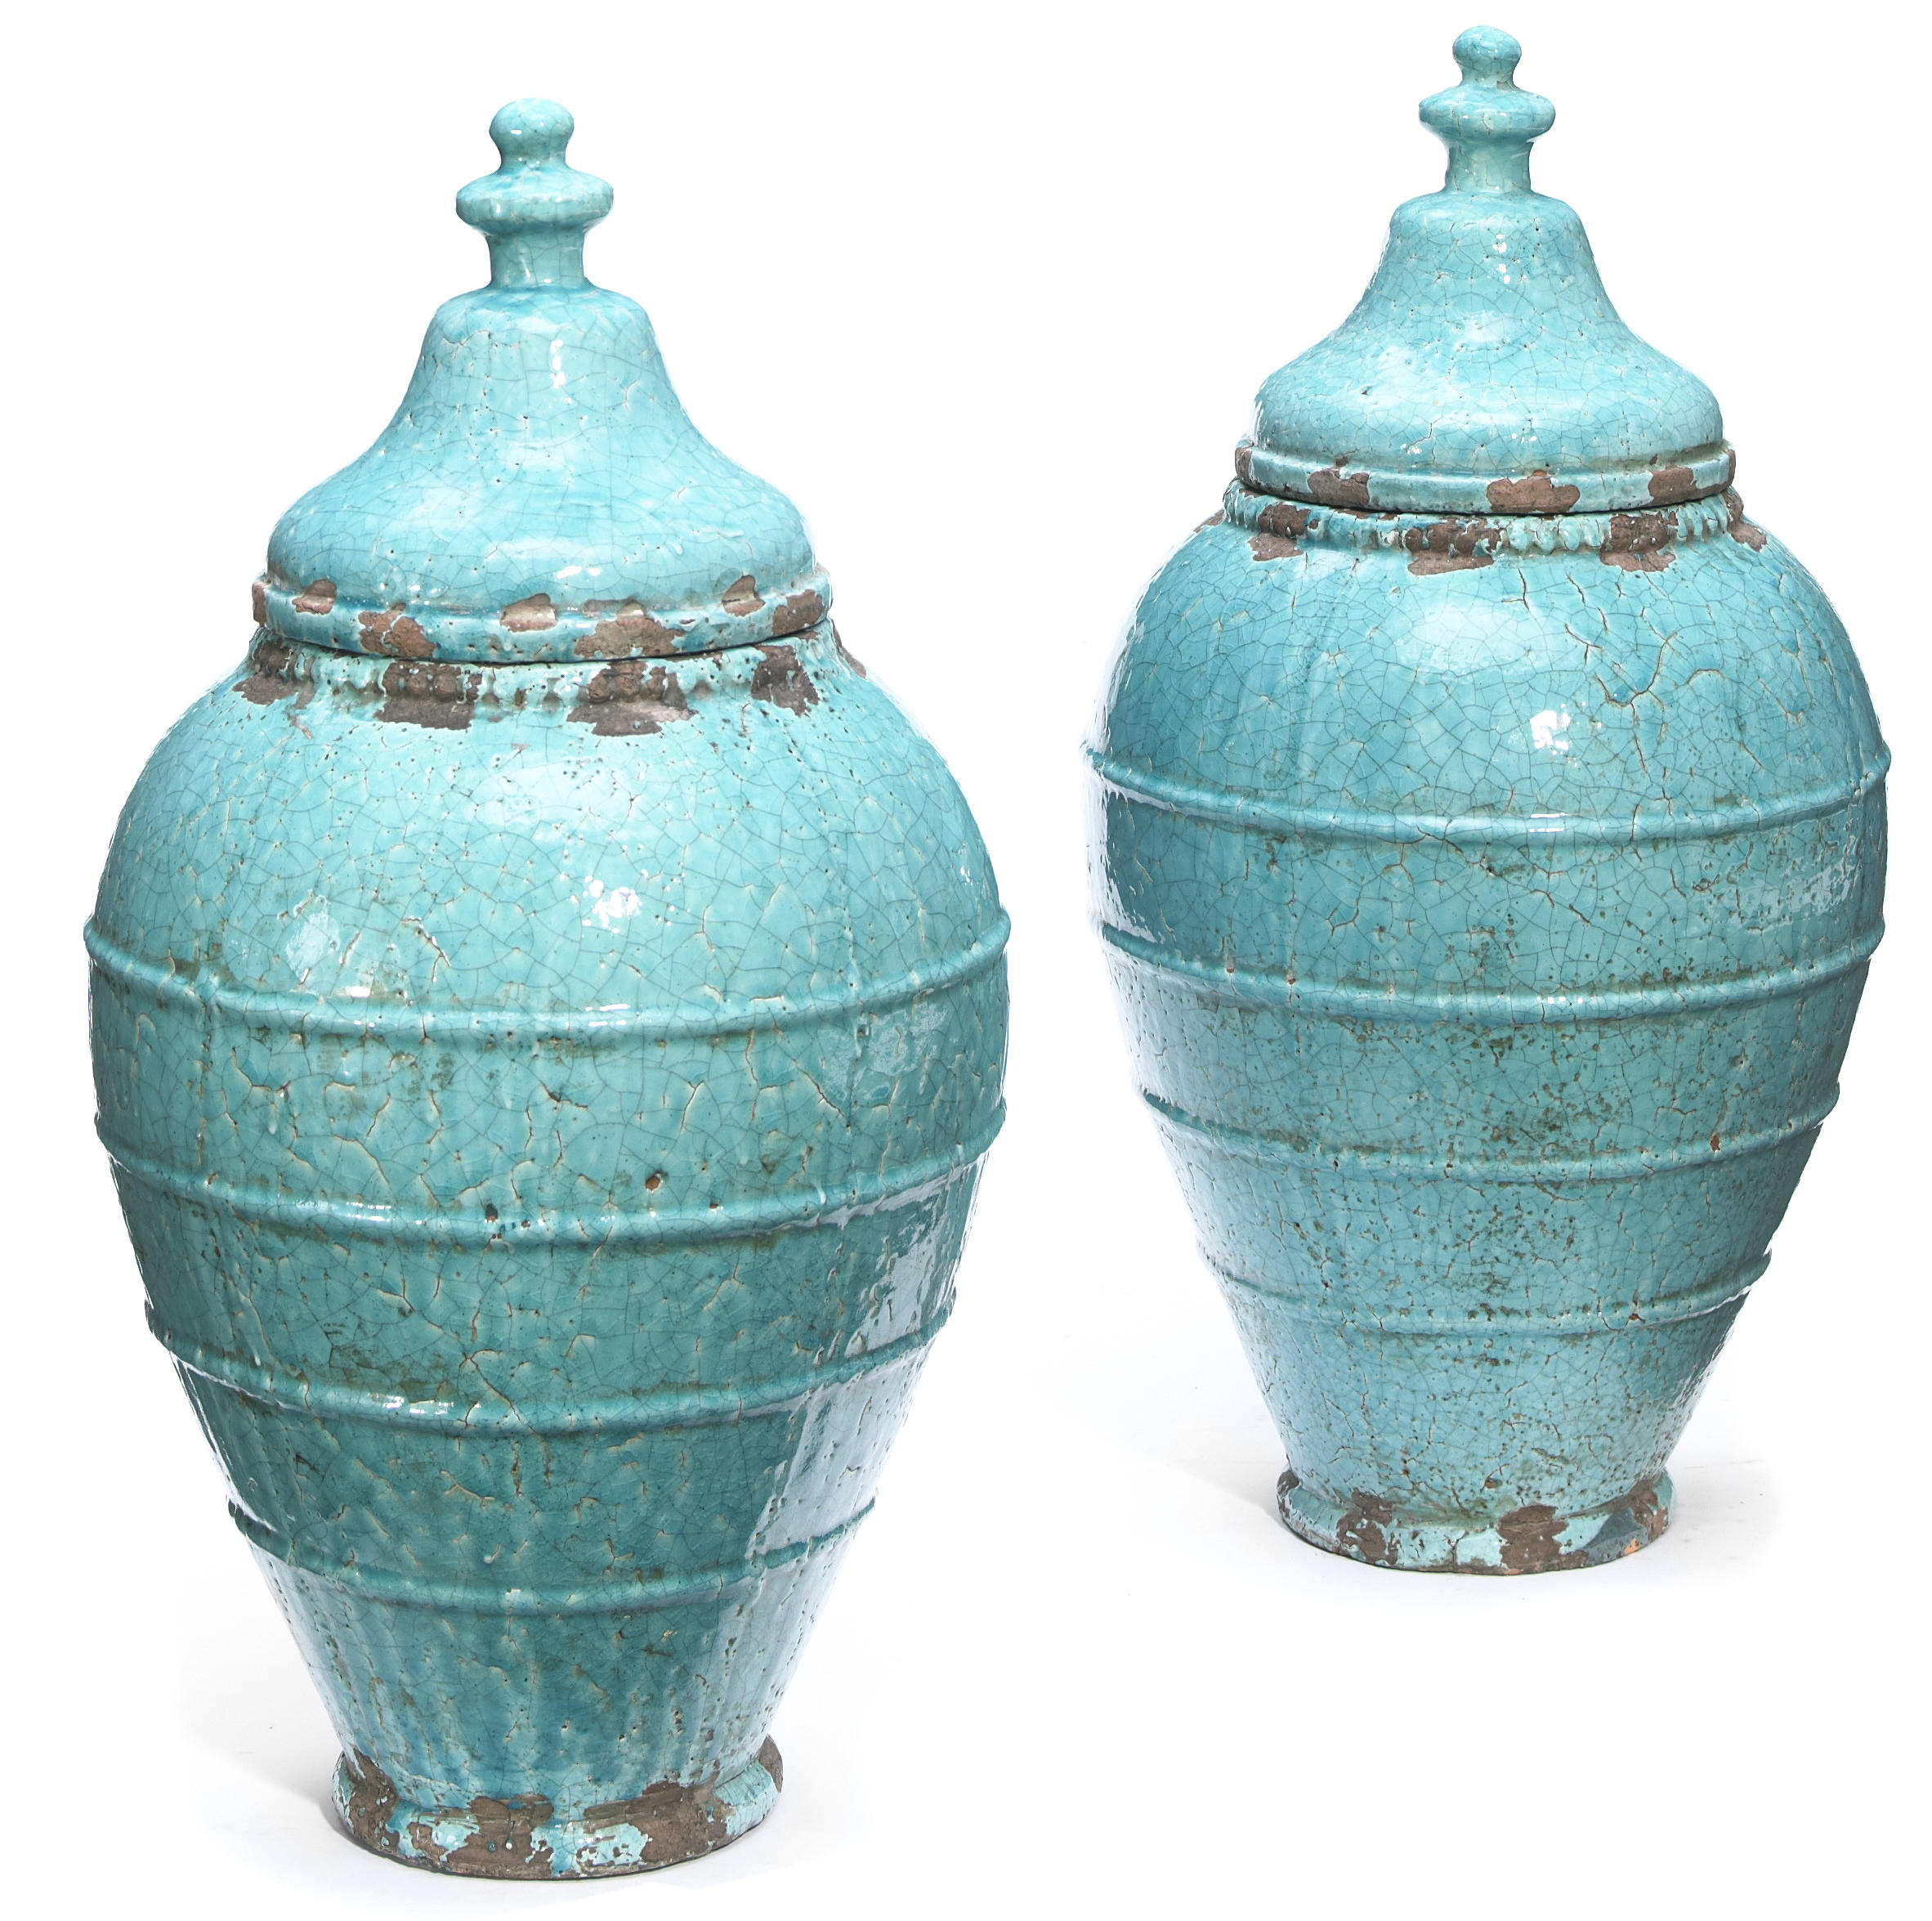 A pair of glazed earthenware covered